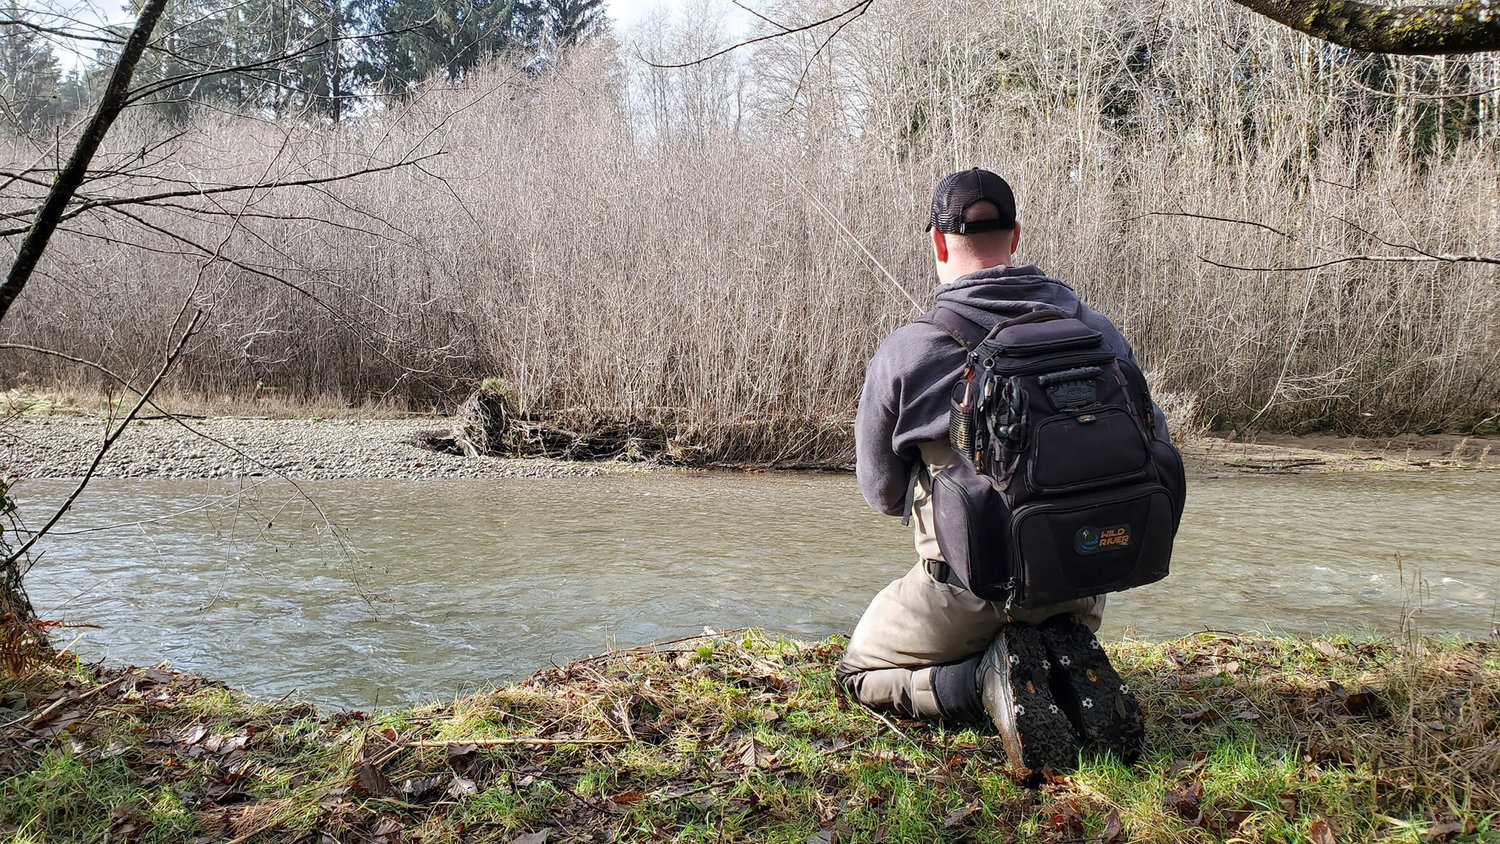 Washington Fishing Regulations for 202122 Now Available Online The